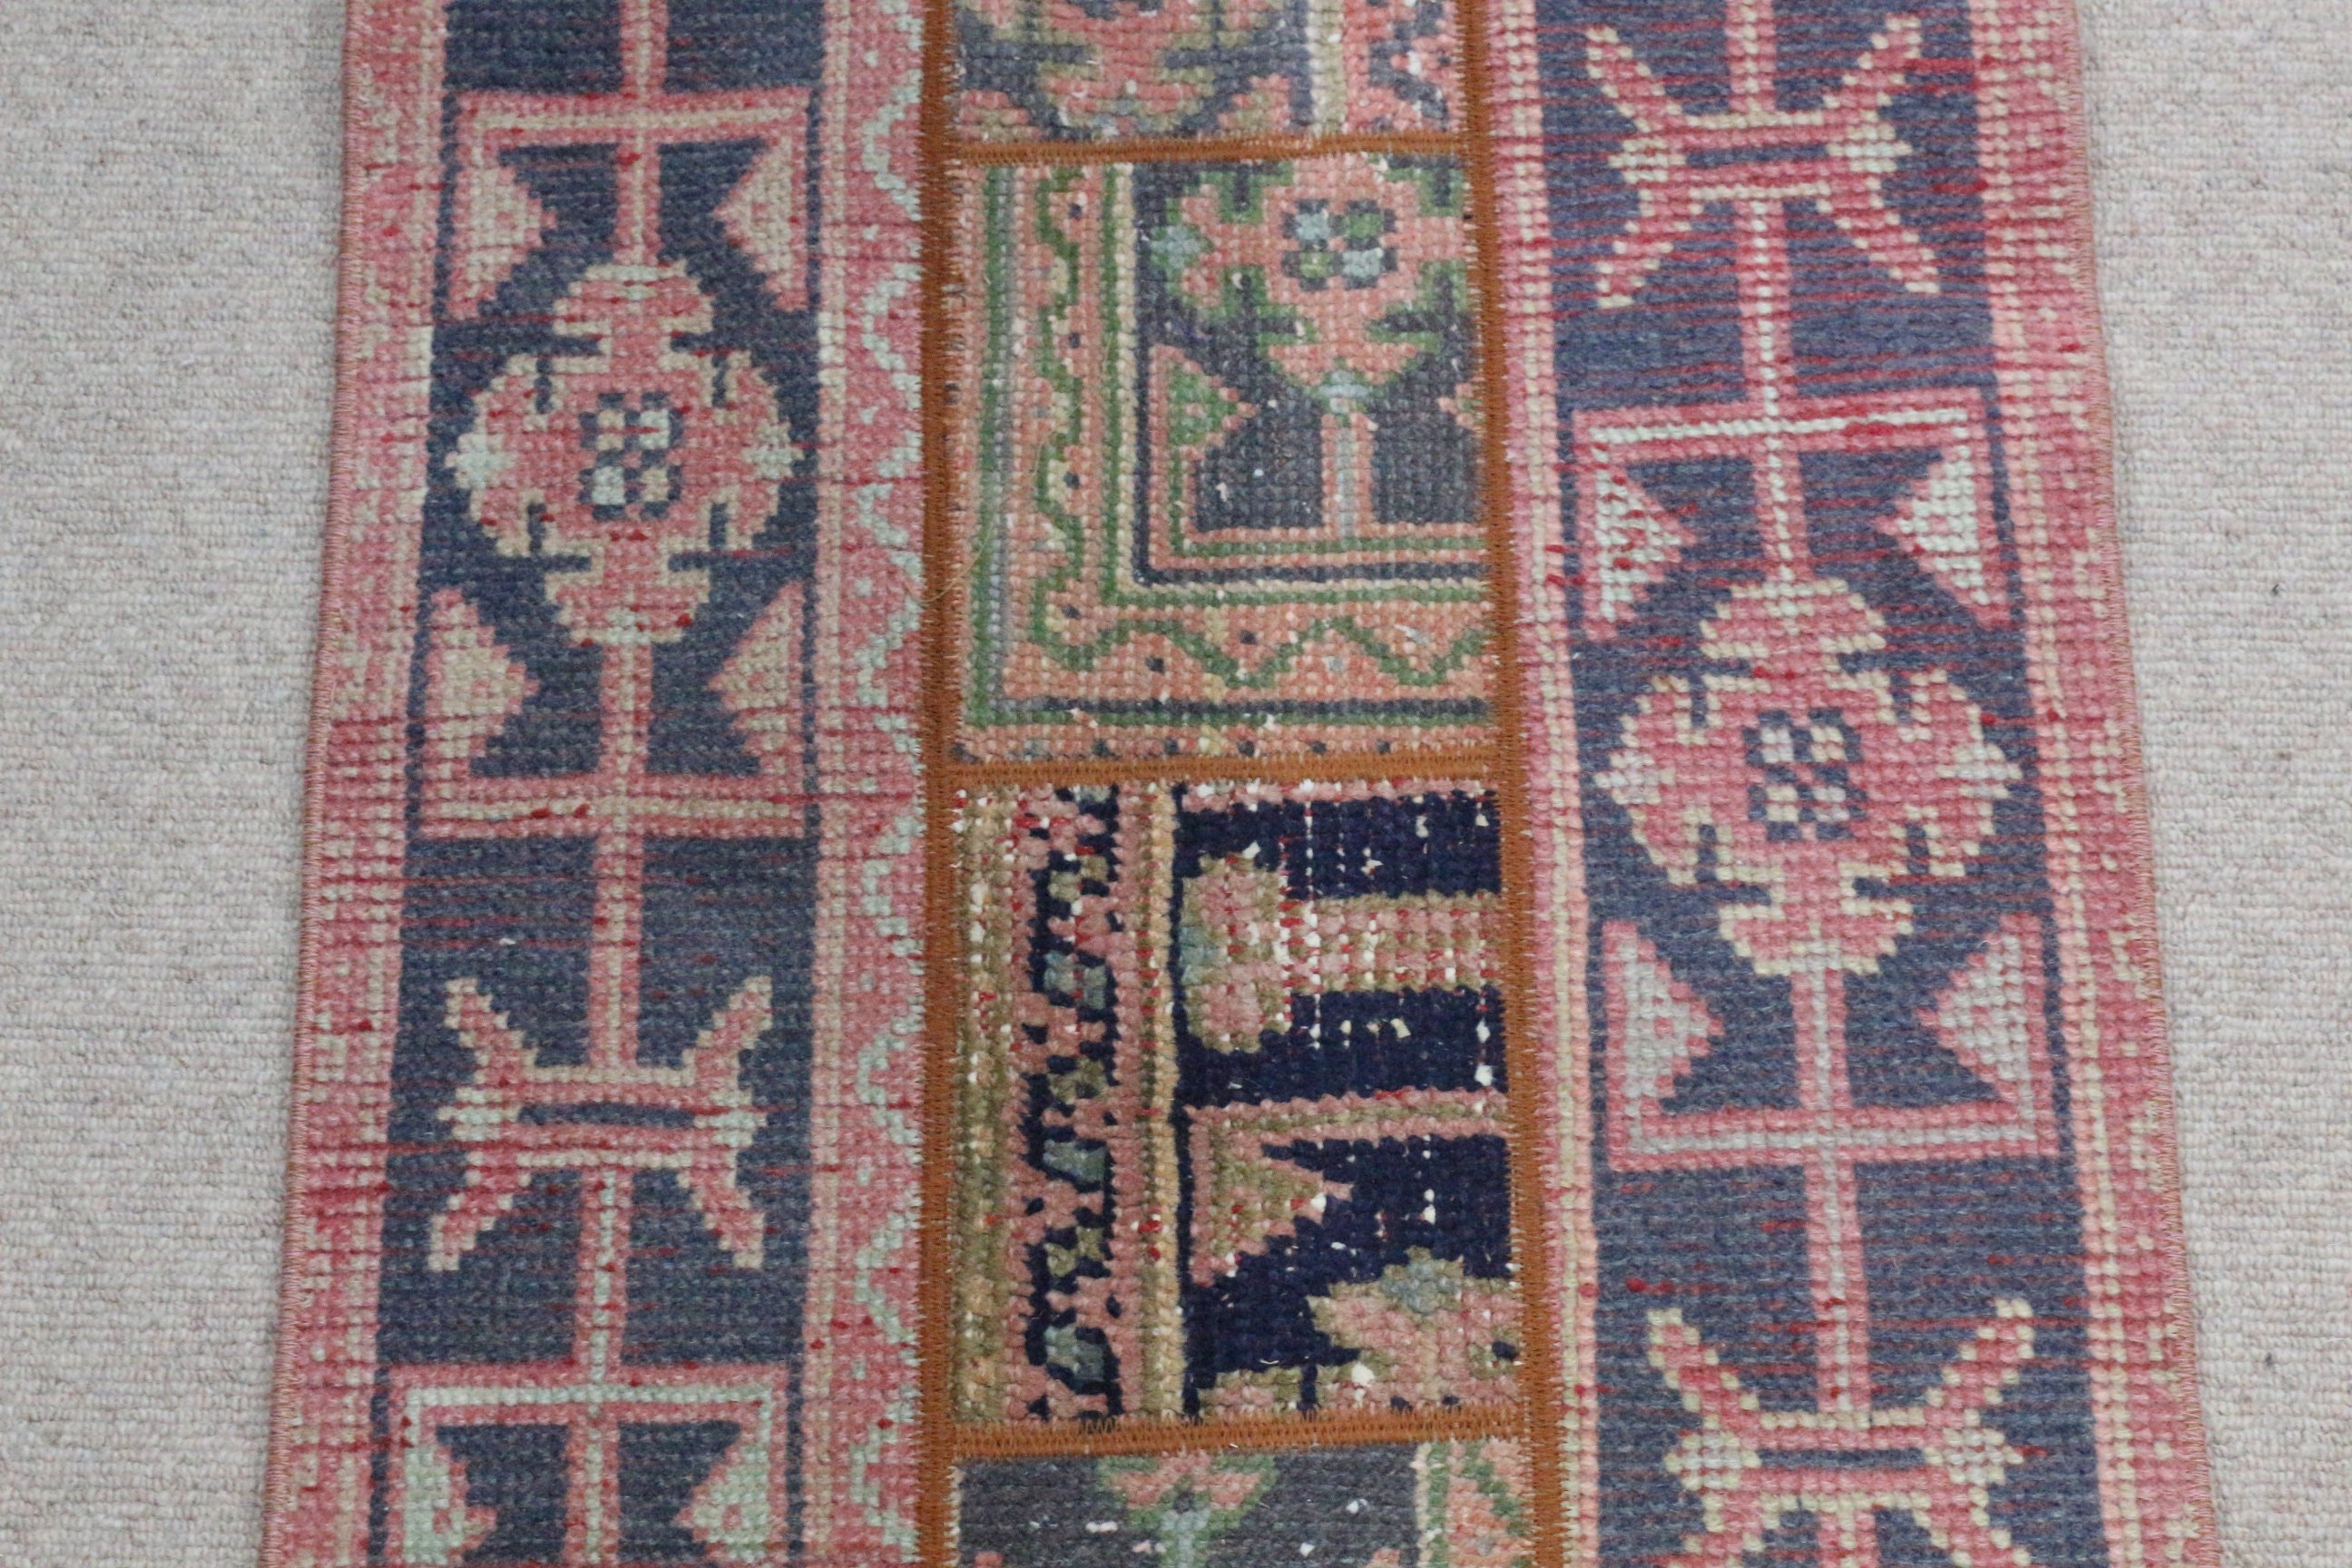 1.8x3.9 ft Small Rug, Cool Rug, Entry Rug, Vintage Rugs, Kitchen Rug, Wall Hanging Rug, Red Anatolian Rug, Rugs for Entry, Turkish Rugs